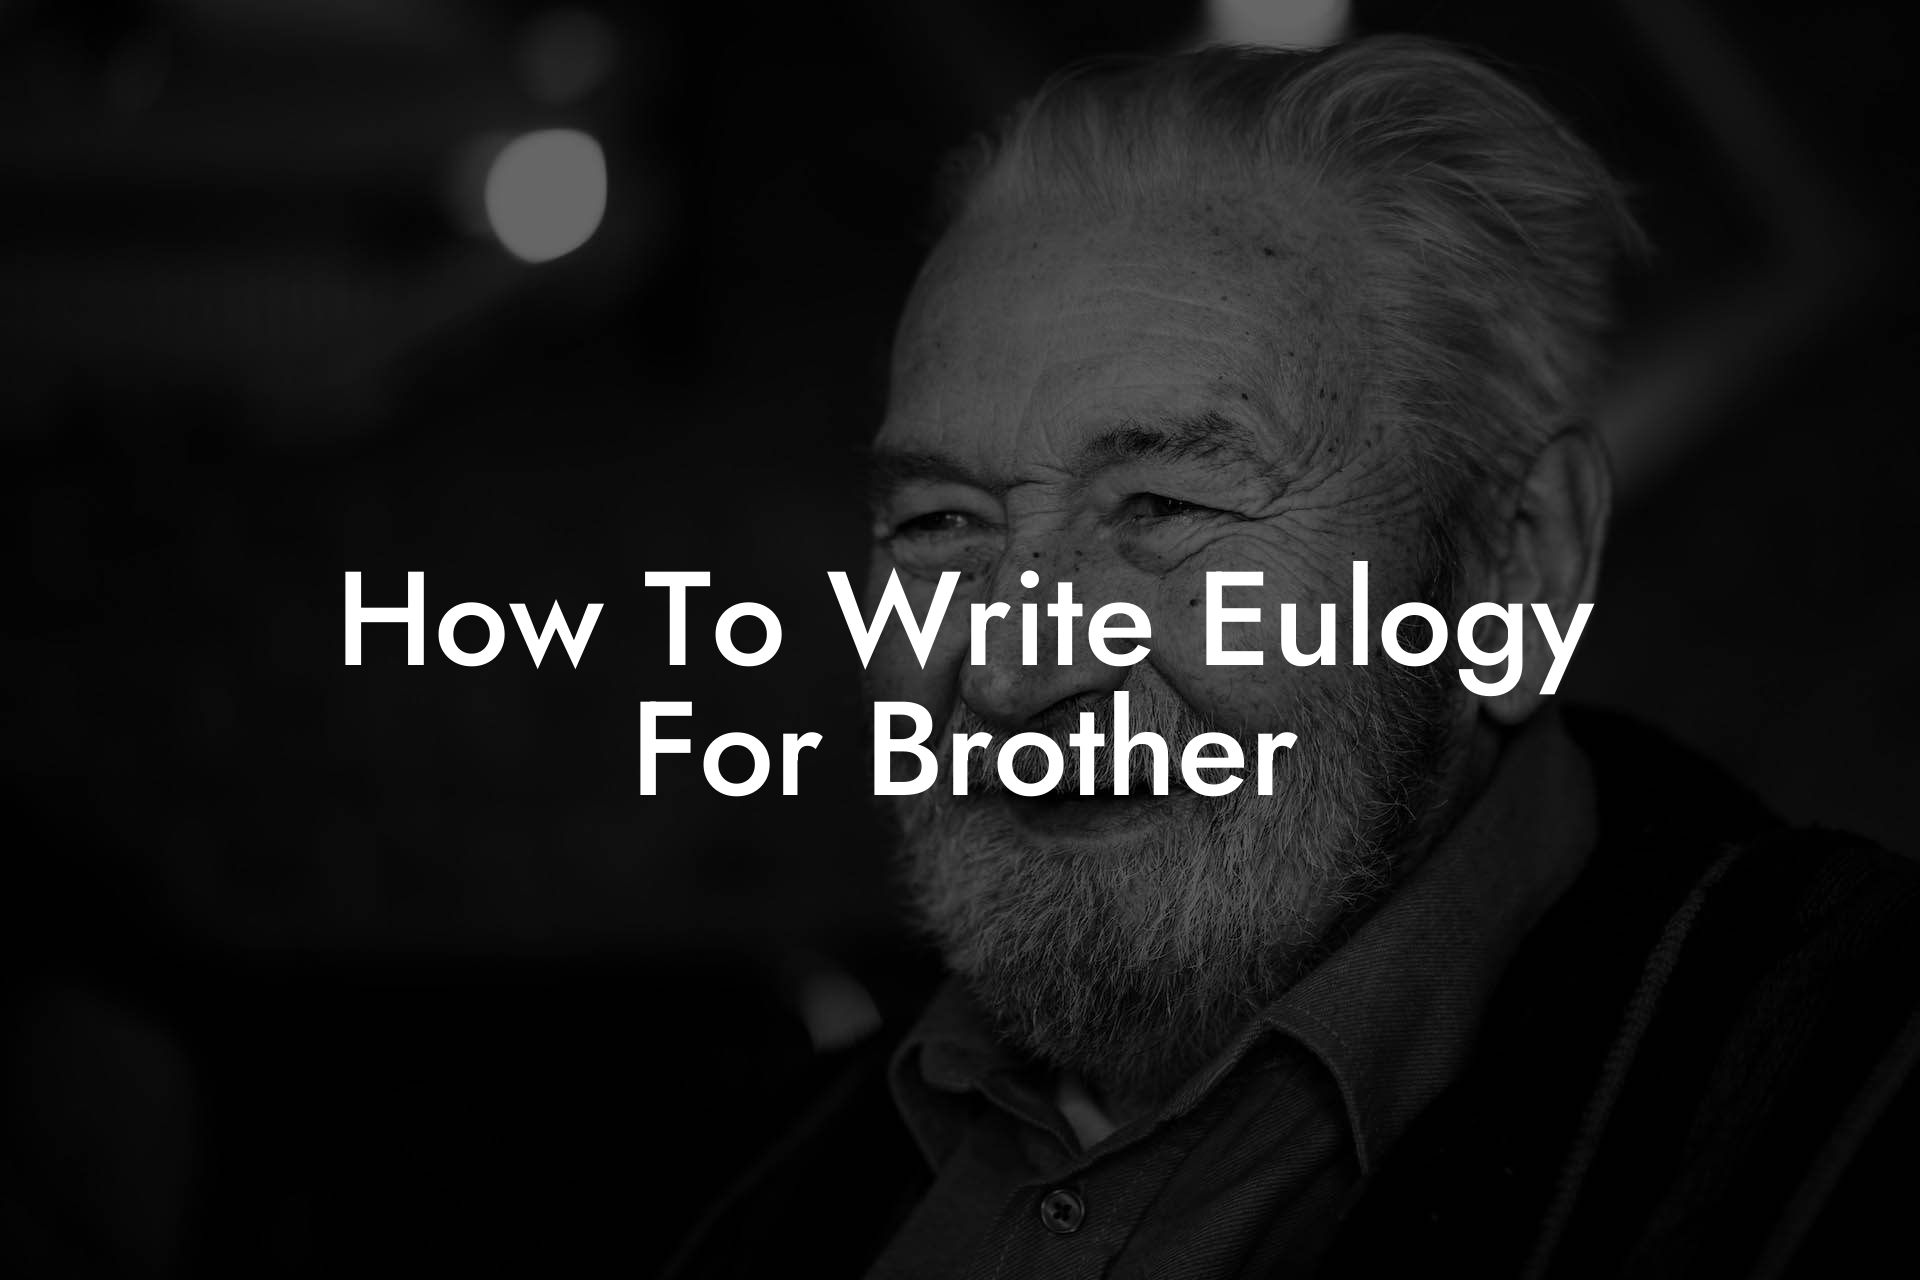 How To Write Eulogy For Brother